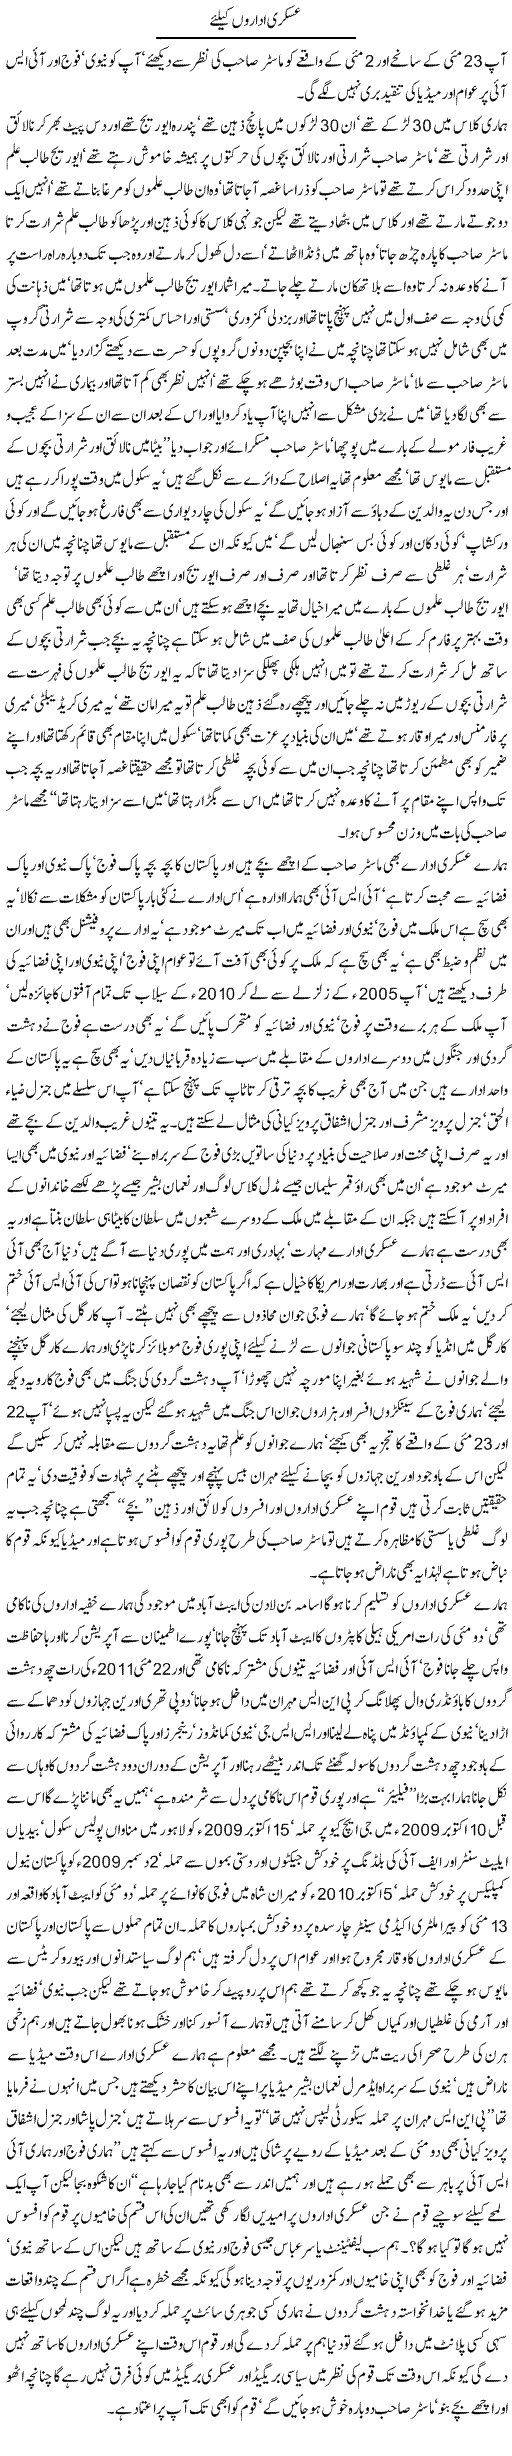 For Arm Forces Express Column Javed Chaudhry 26 May 2011